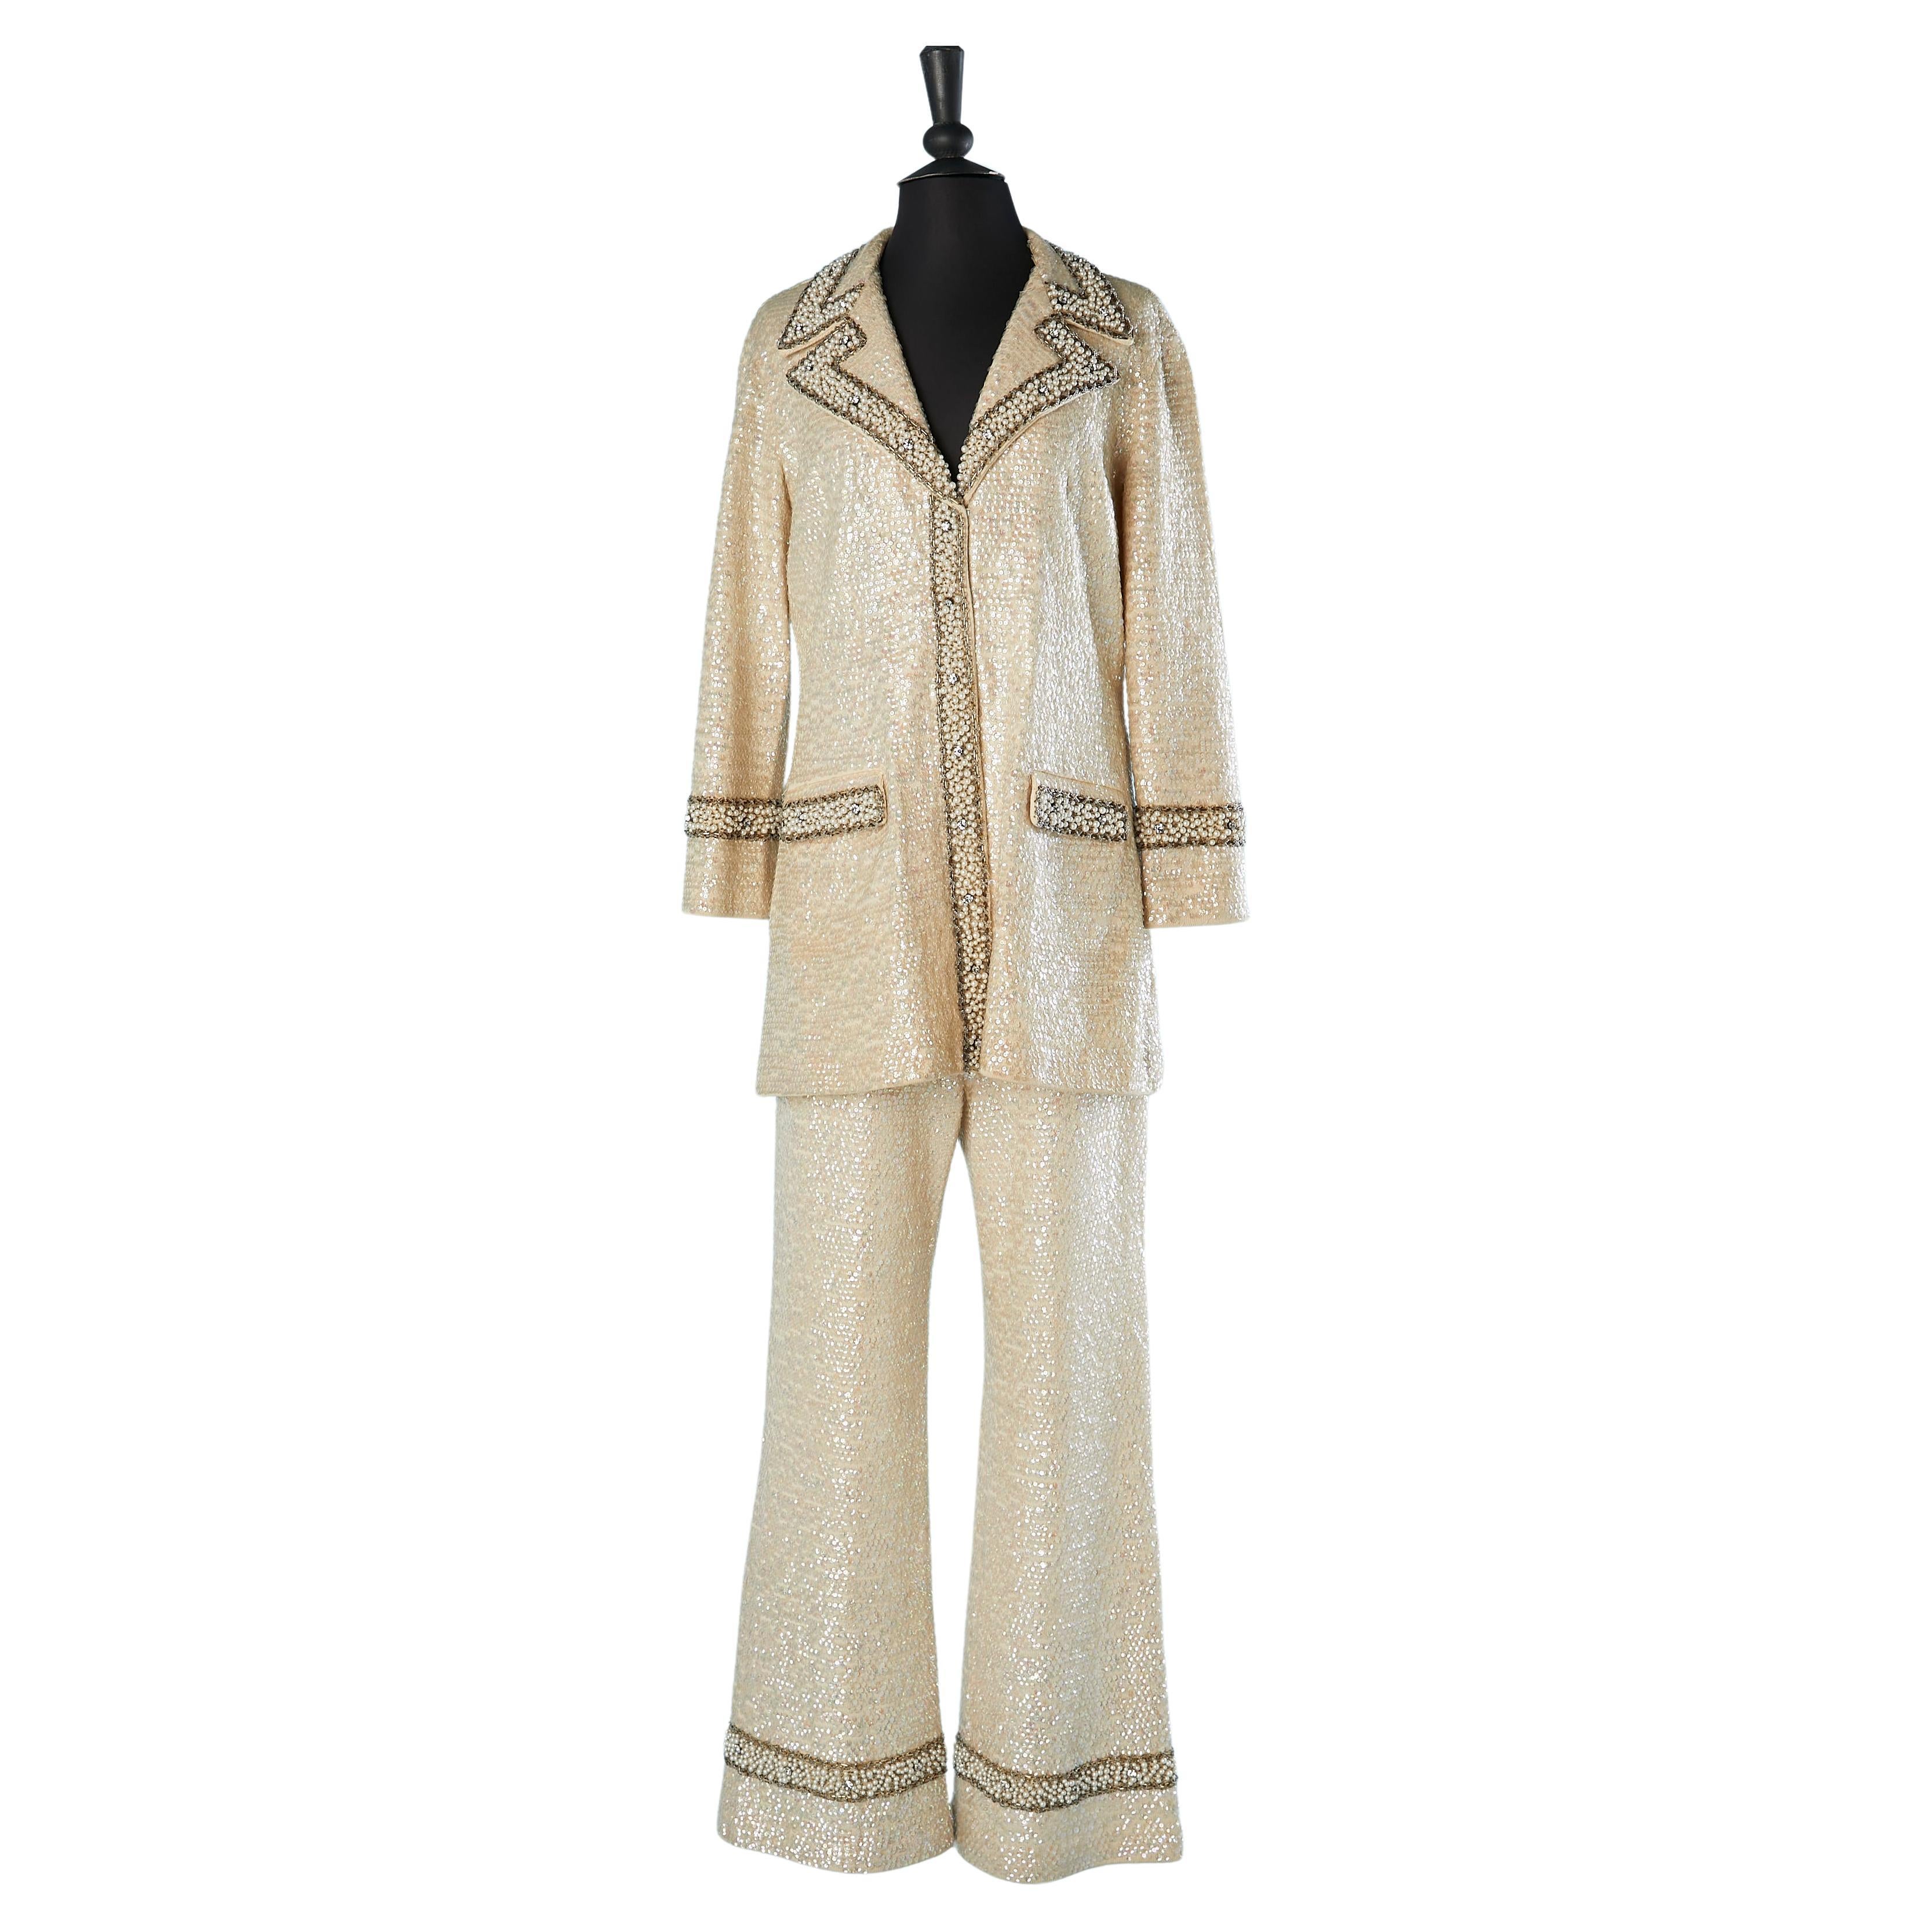 Off white knit jacket and trouser ensemble with beadwork and sequin De Paul NY  For Sale